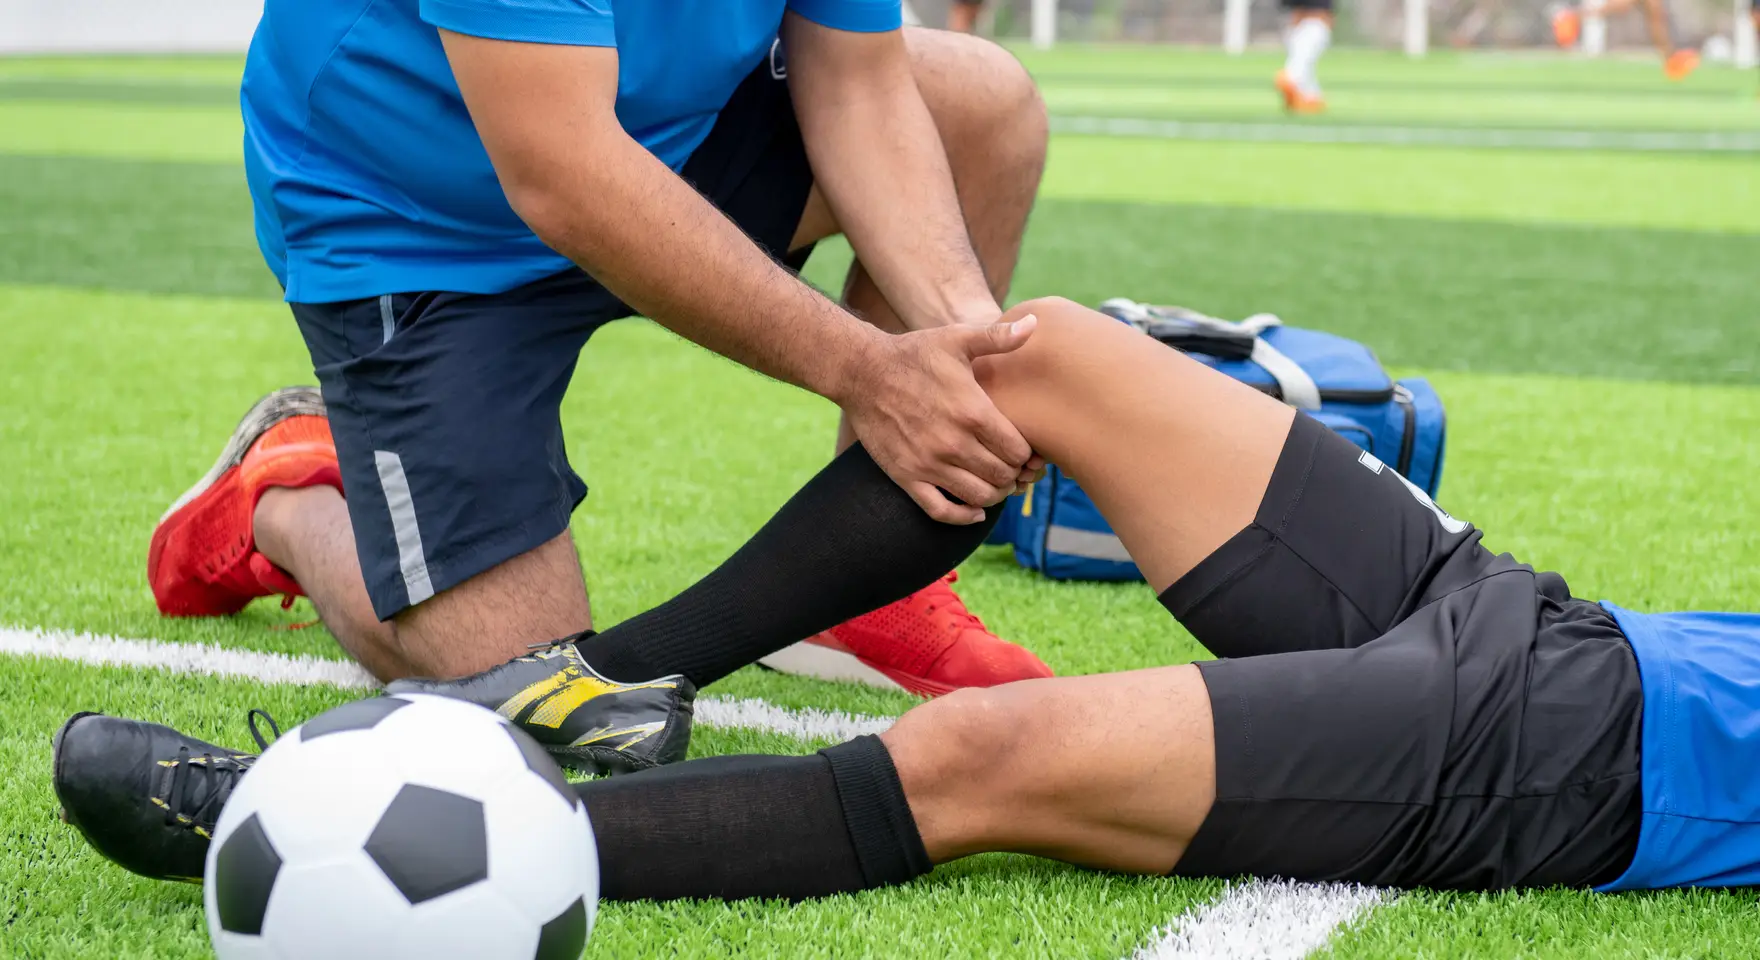 ACL injury: Rising number of children suffering serious knee injuries  playing sport